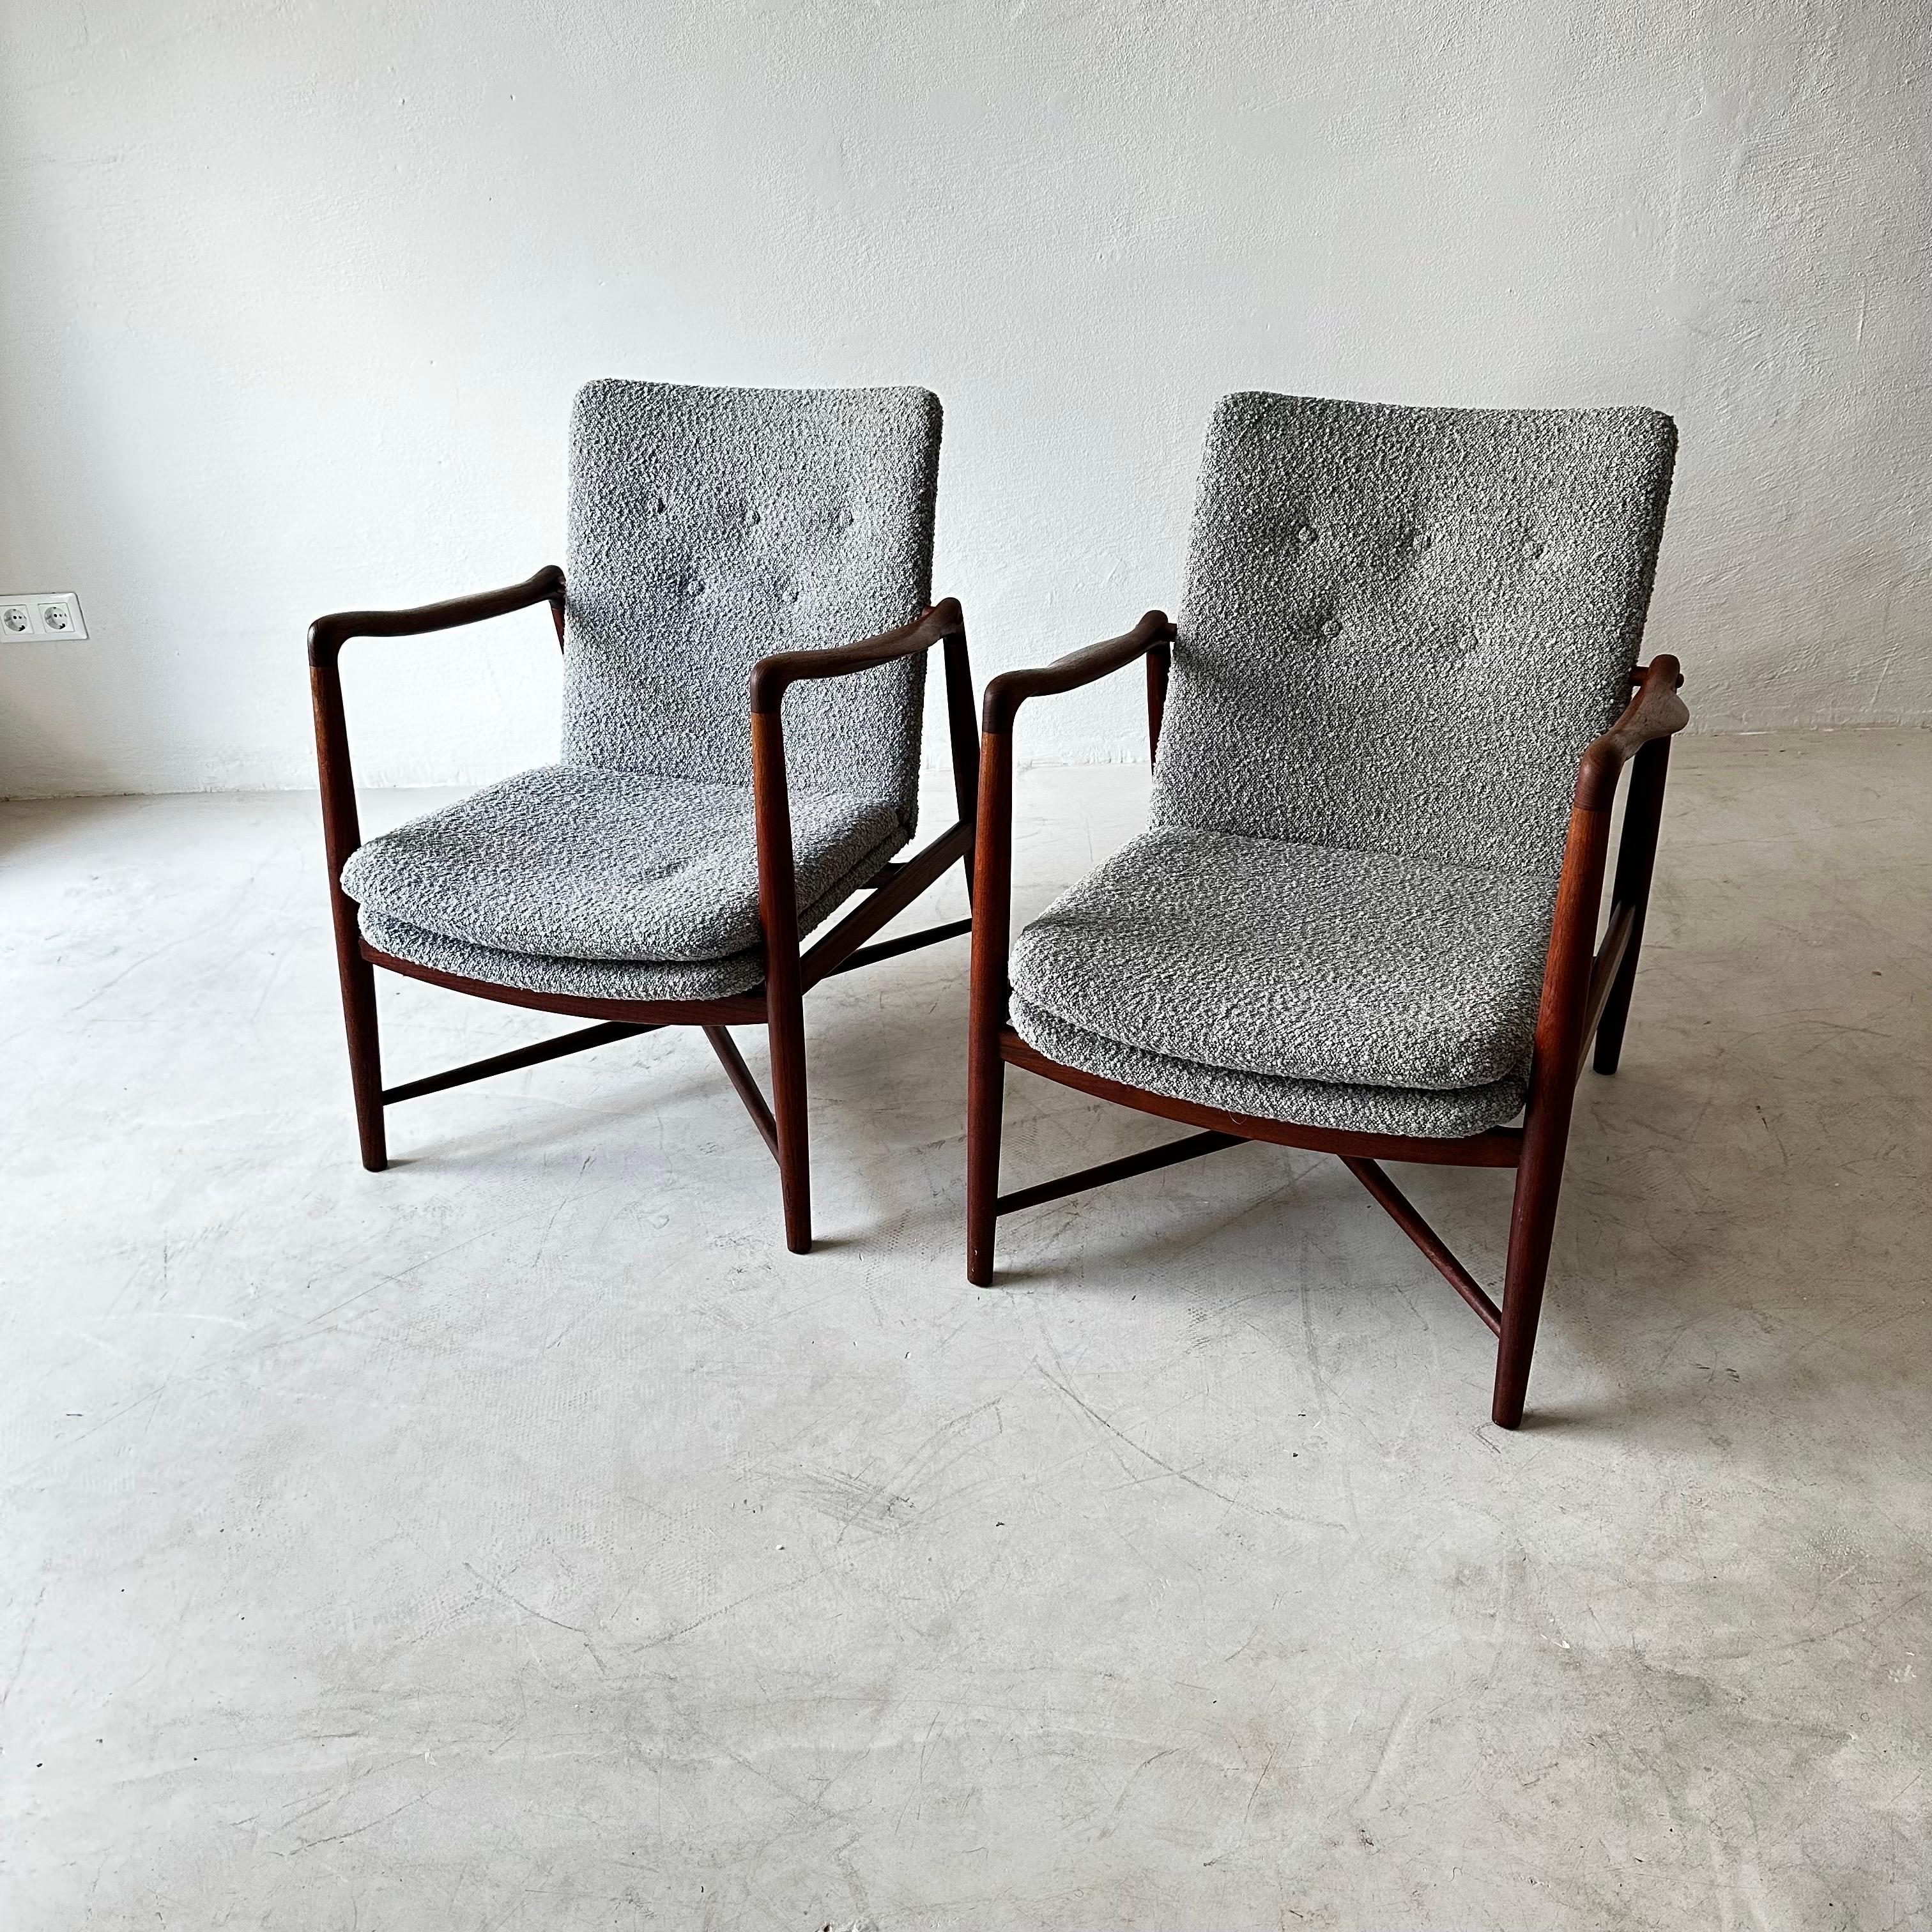 Rare pair of easy chairs model BO59/ fireplace chair designed by Finn Juhl. Produced by Bovirke in Denmark. Teak and newly reupholstered in grey boucle fabric.